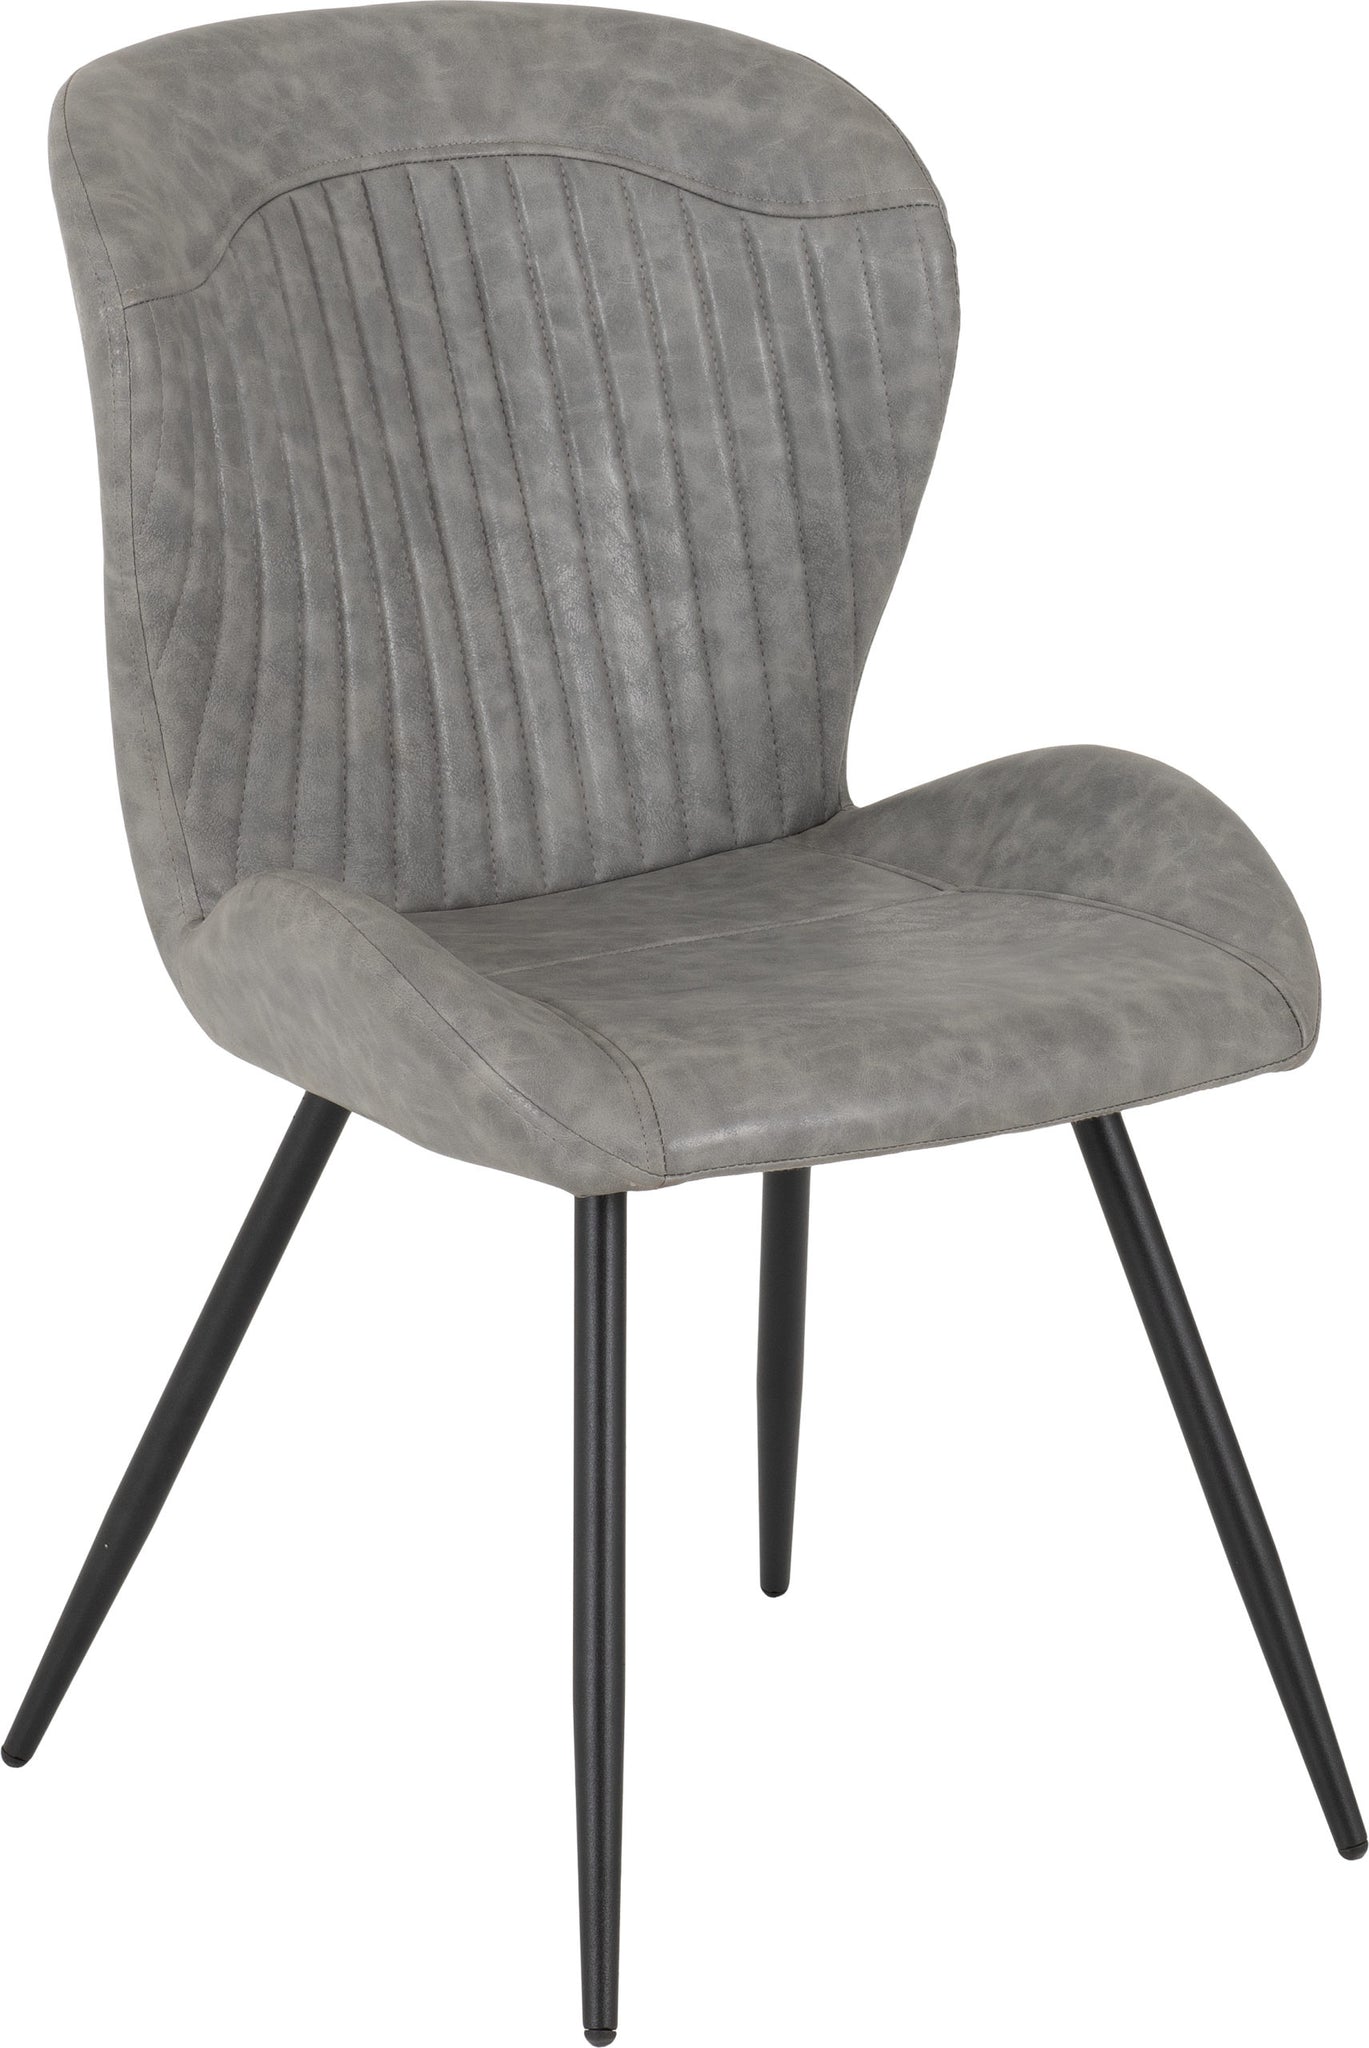 QUEBEC-DINING-CHAIR-GREY-PU-2021-400-402-127-04-scaled.jpg